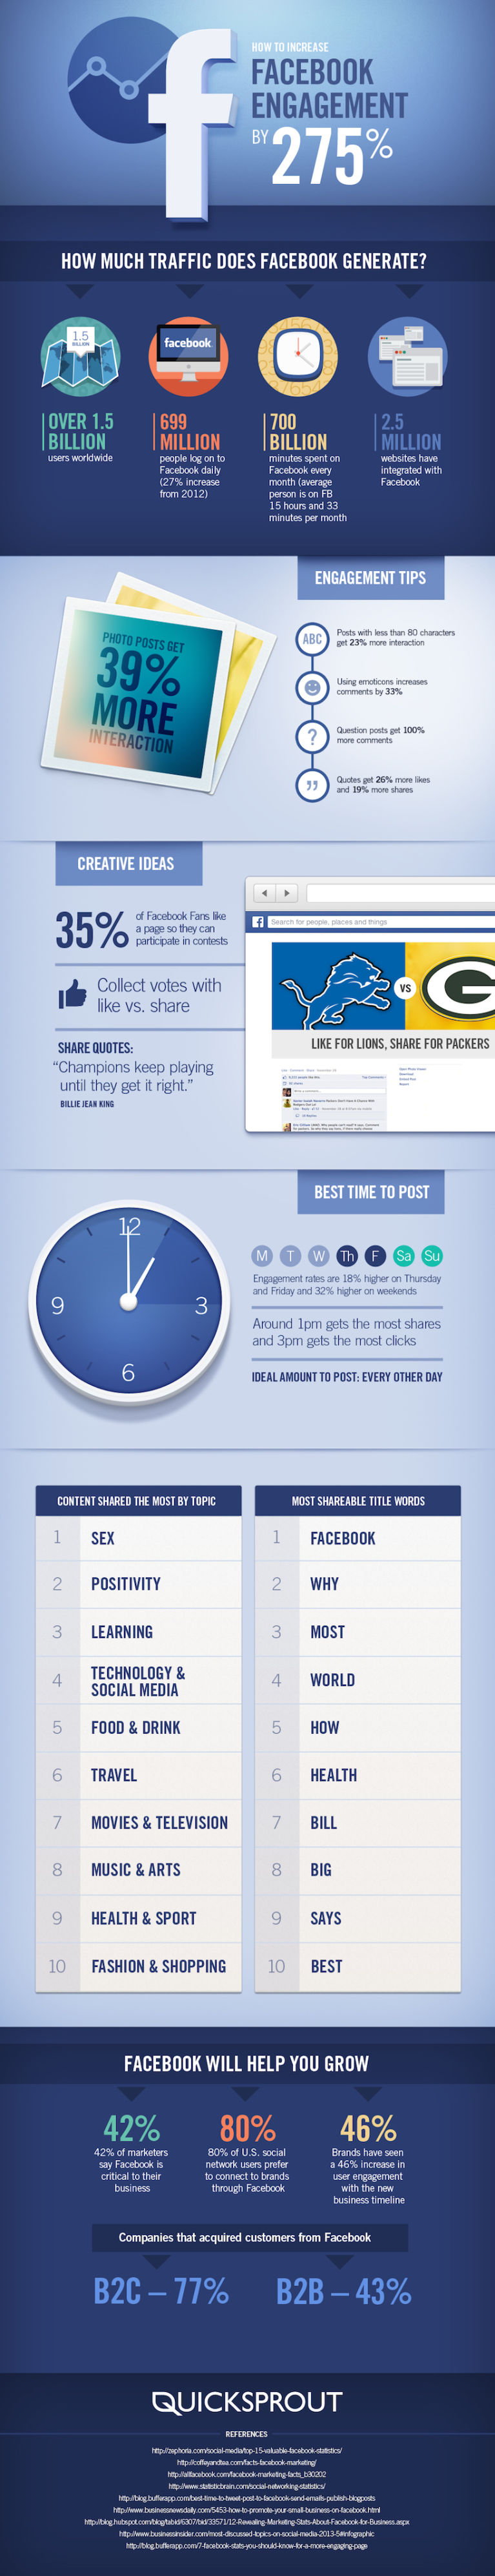 Infographic credit QuickSprout ( http://www.quicksprout.com/2014/01/10/how-to-increase-your-facebook-engagement-by-275/)